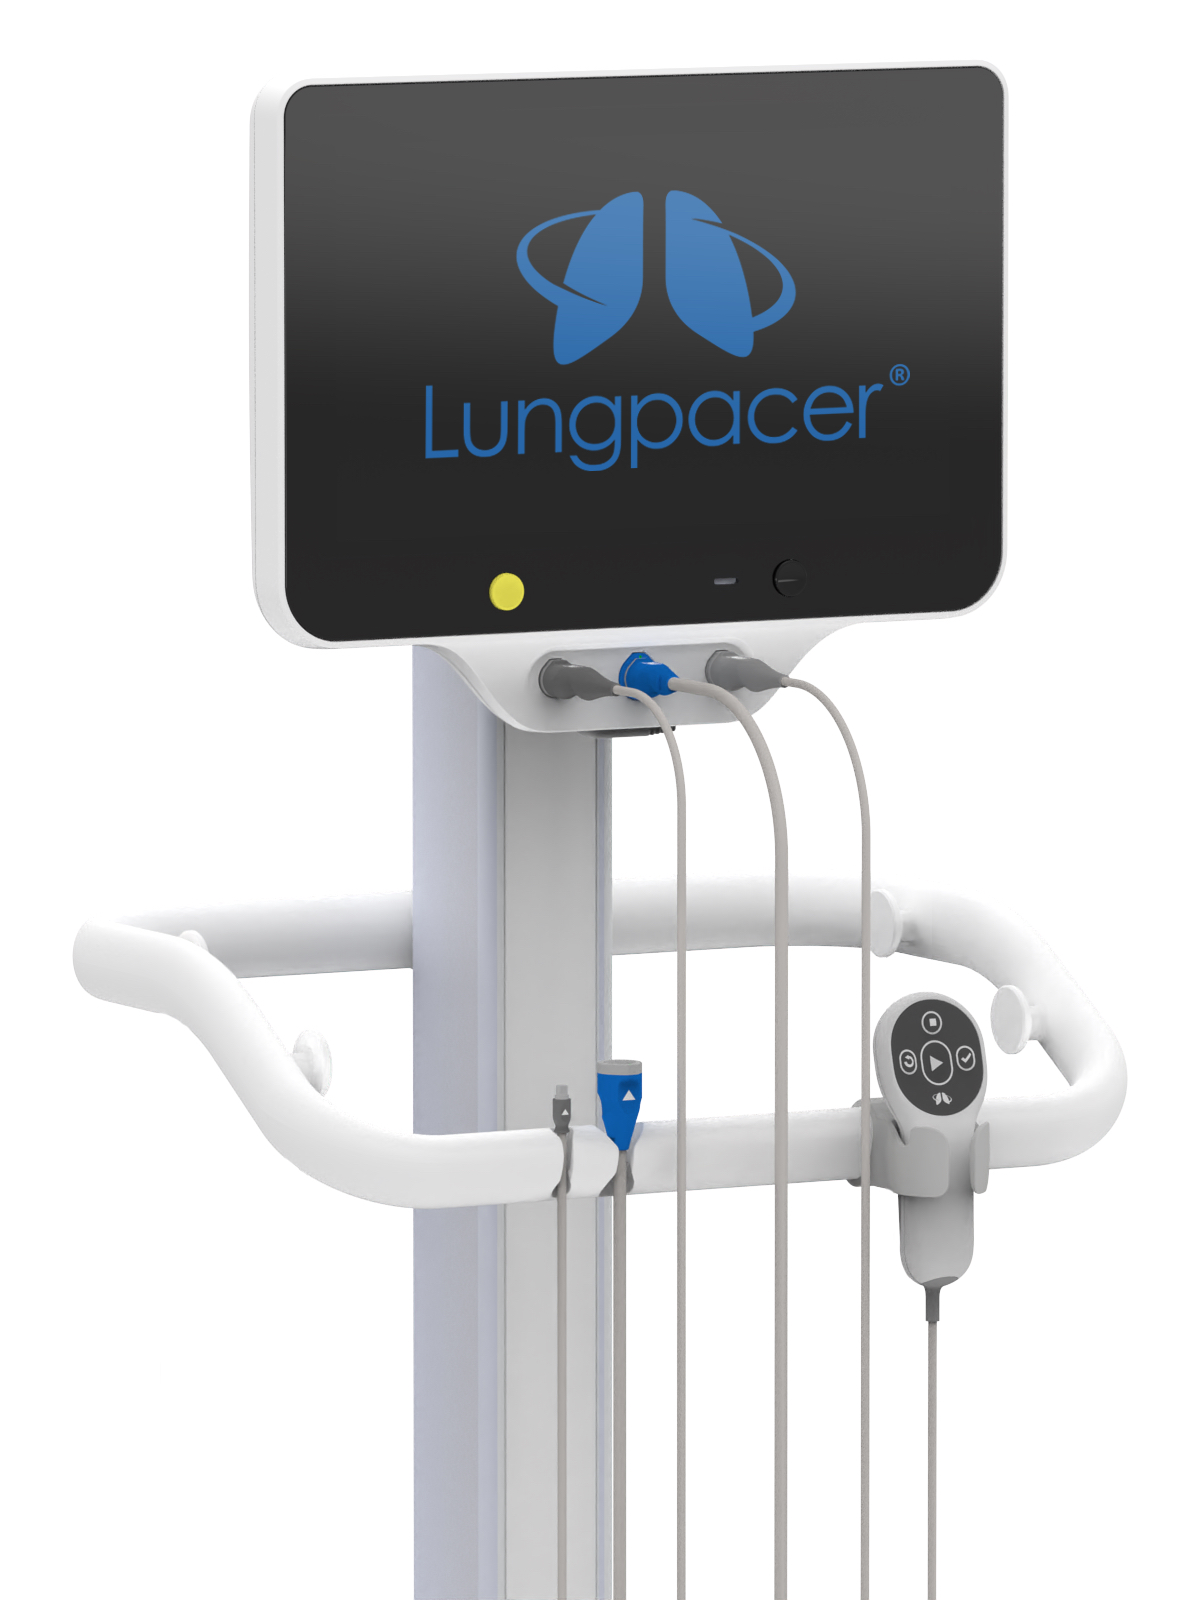 Lungpacer